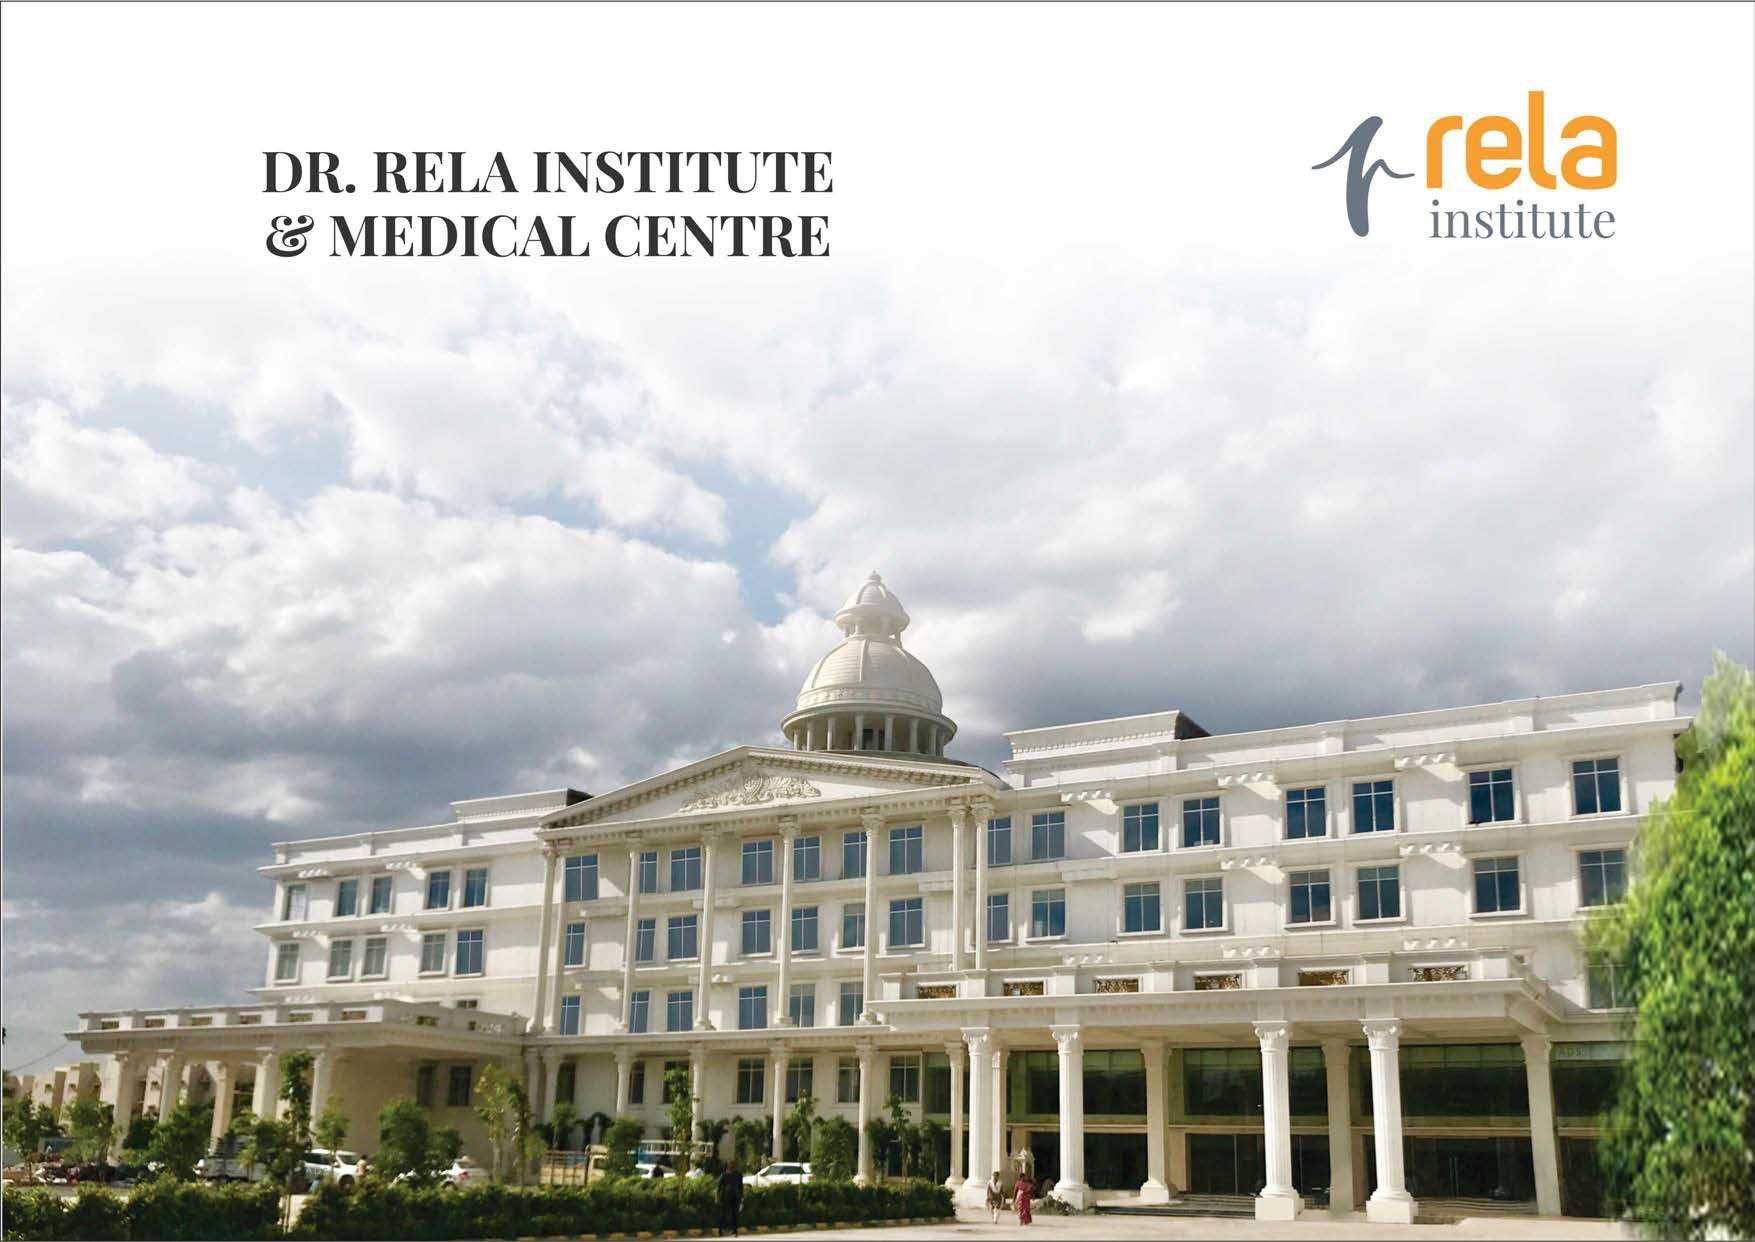 Dr Rela Institute and Medical Centre